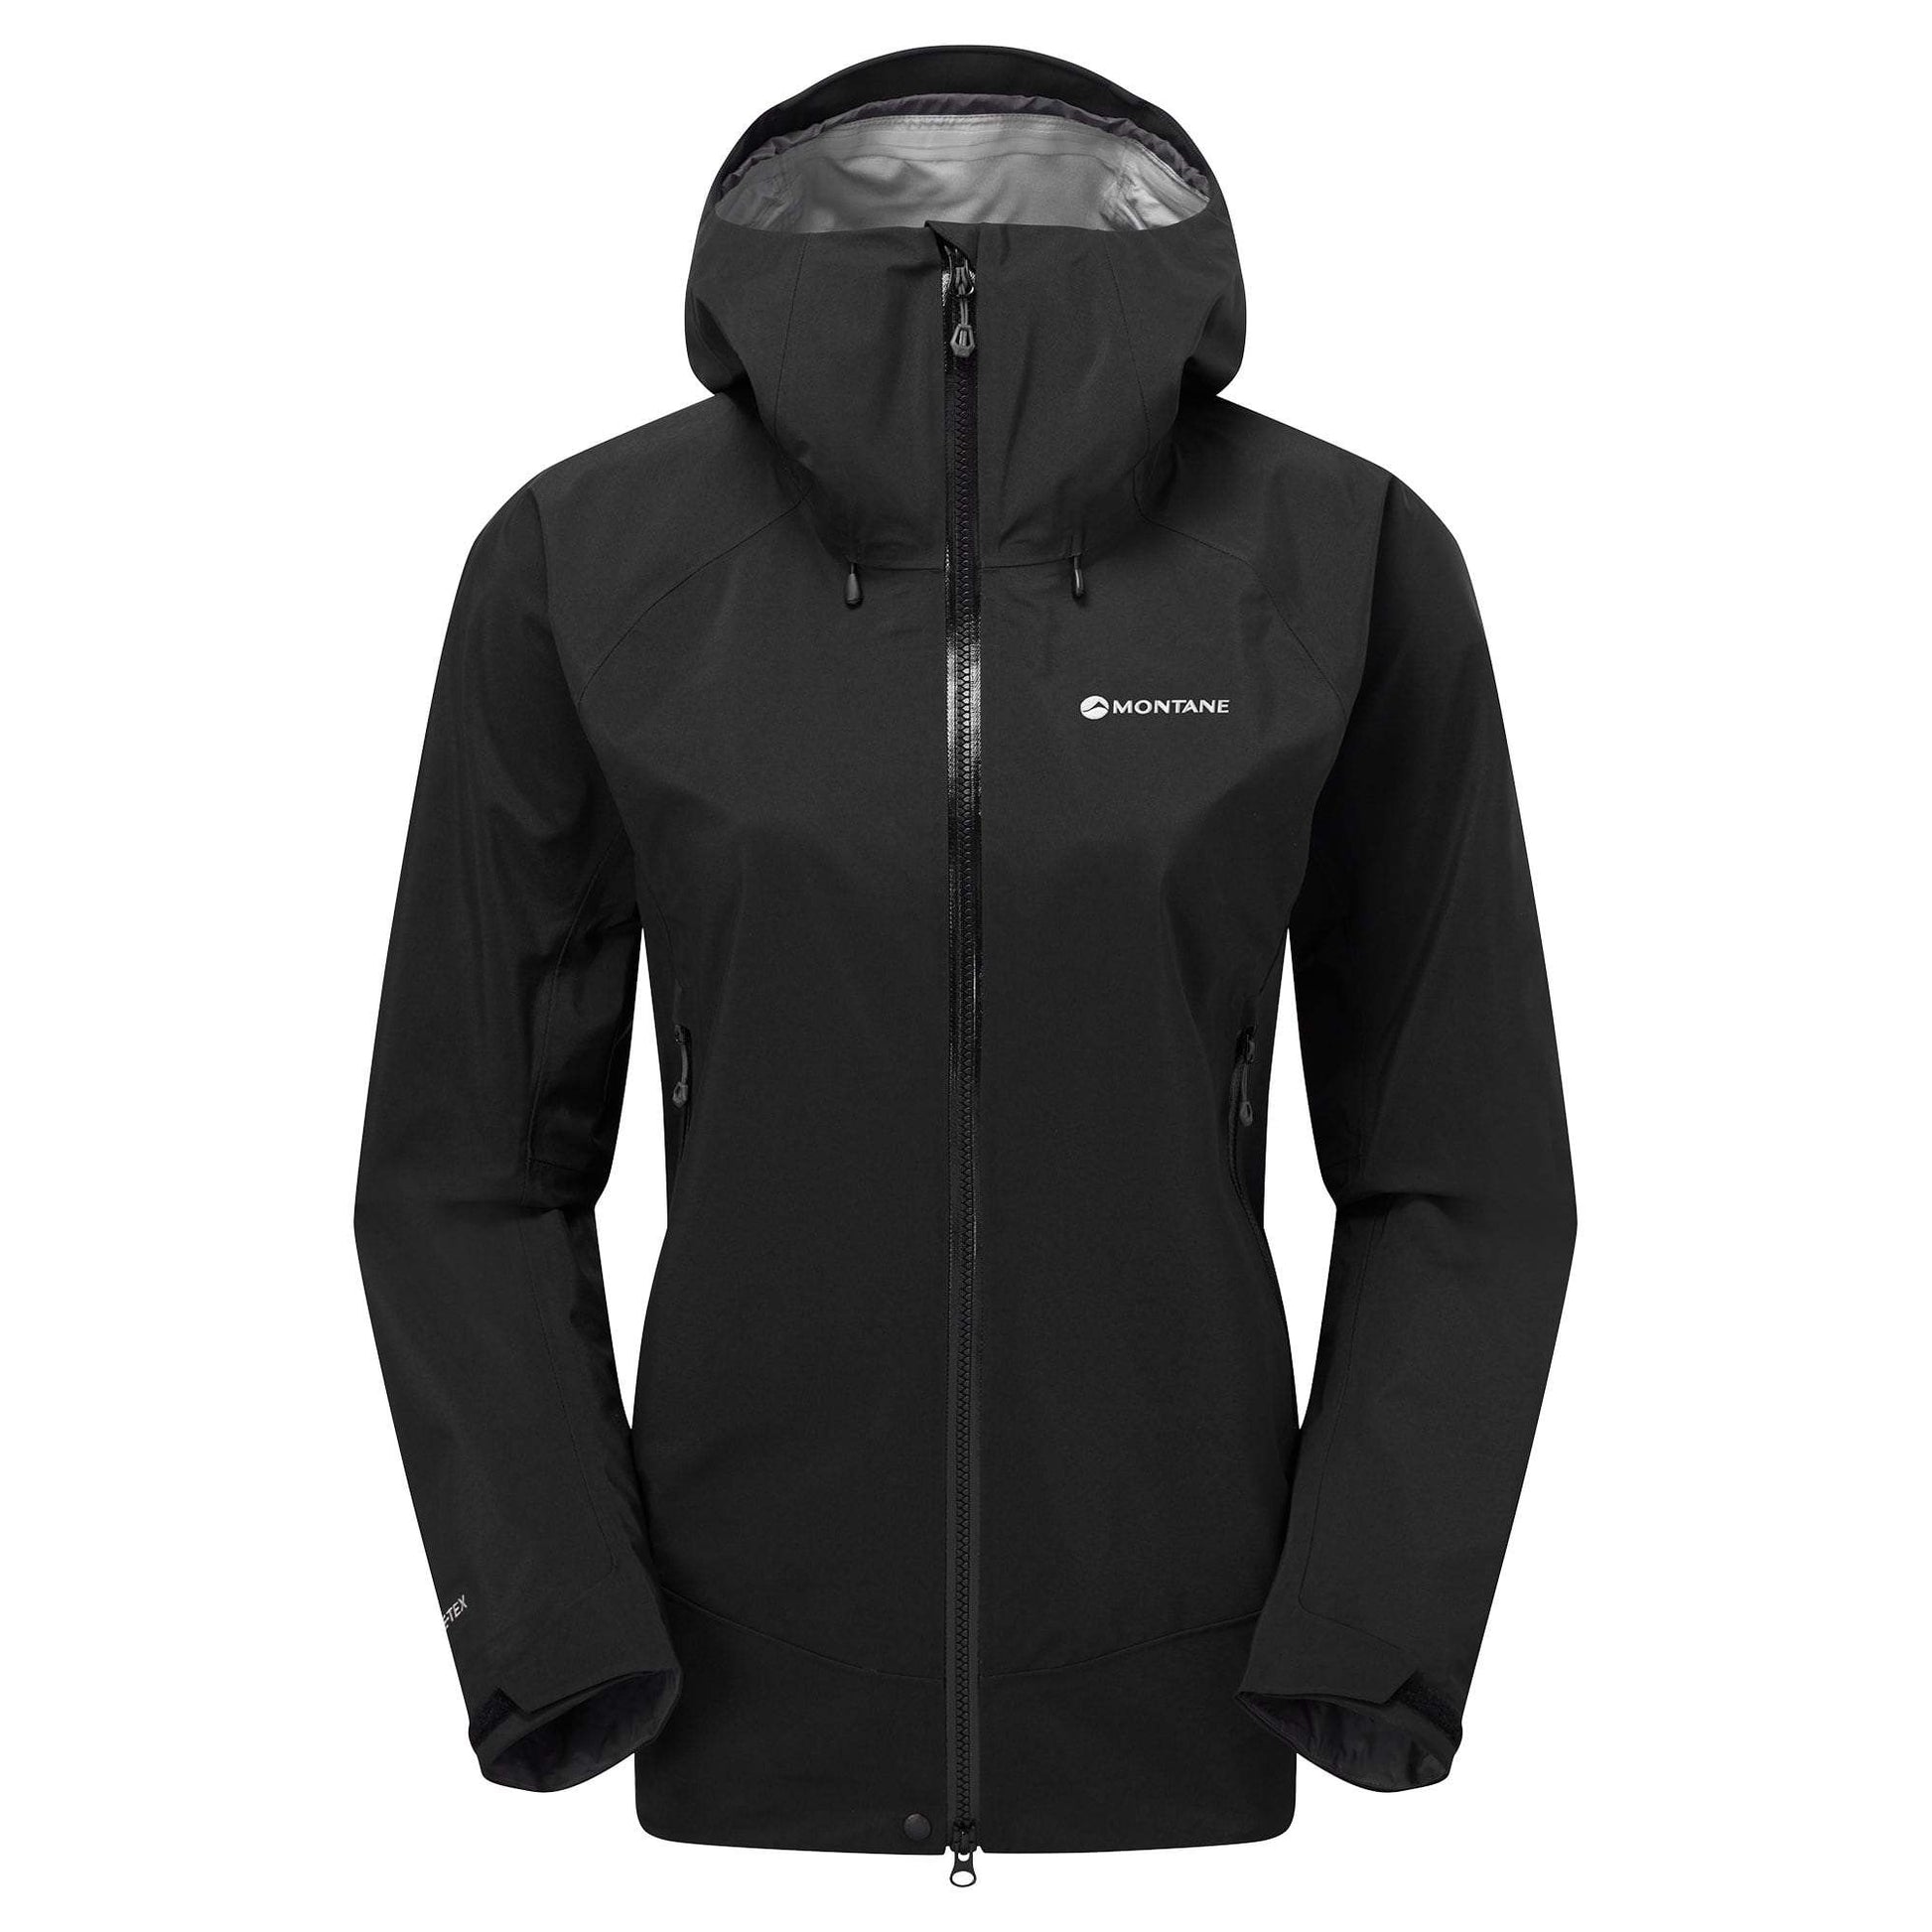 Women’s Phase XT Jacket by Montane - The Luxury Promotional Gifts Company Limited